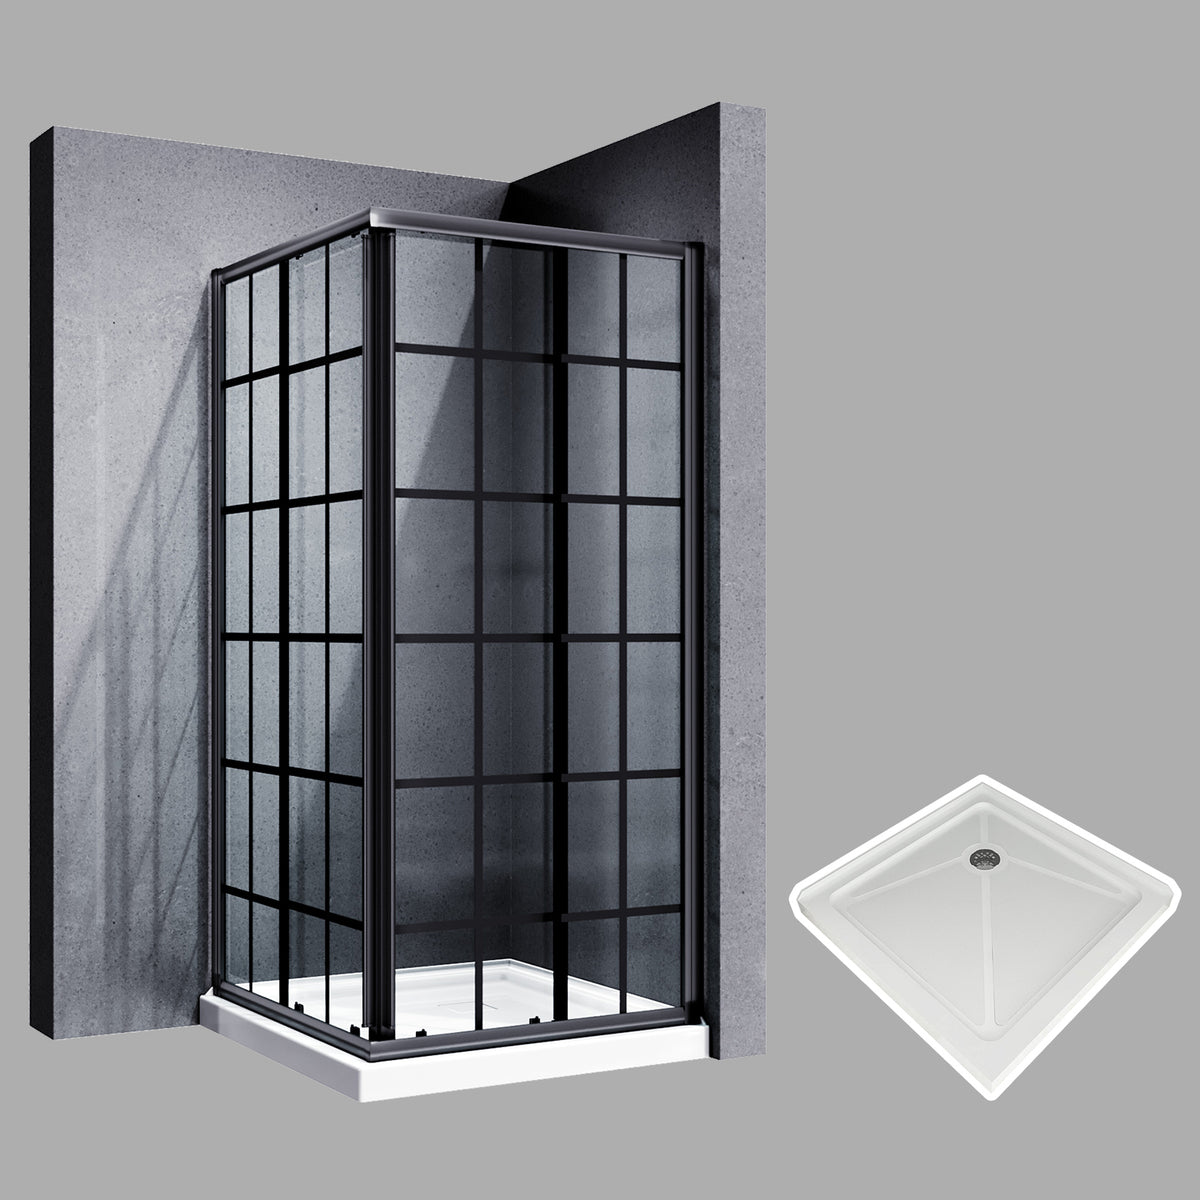 SUNNY SHOWER 36 in. D x 36 in. W x 72 in. H Black Finish Corner Entry Enclosure With Sliding Doors And White Square Base